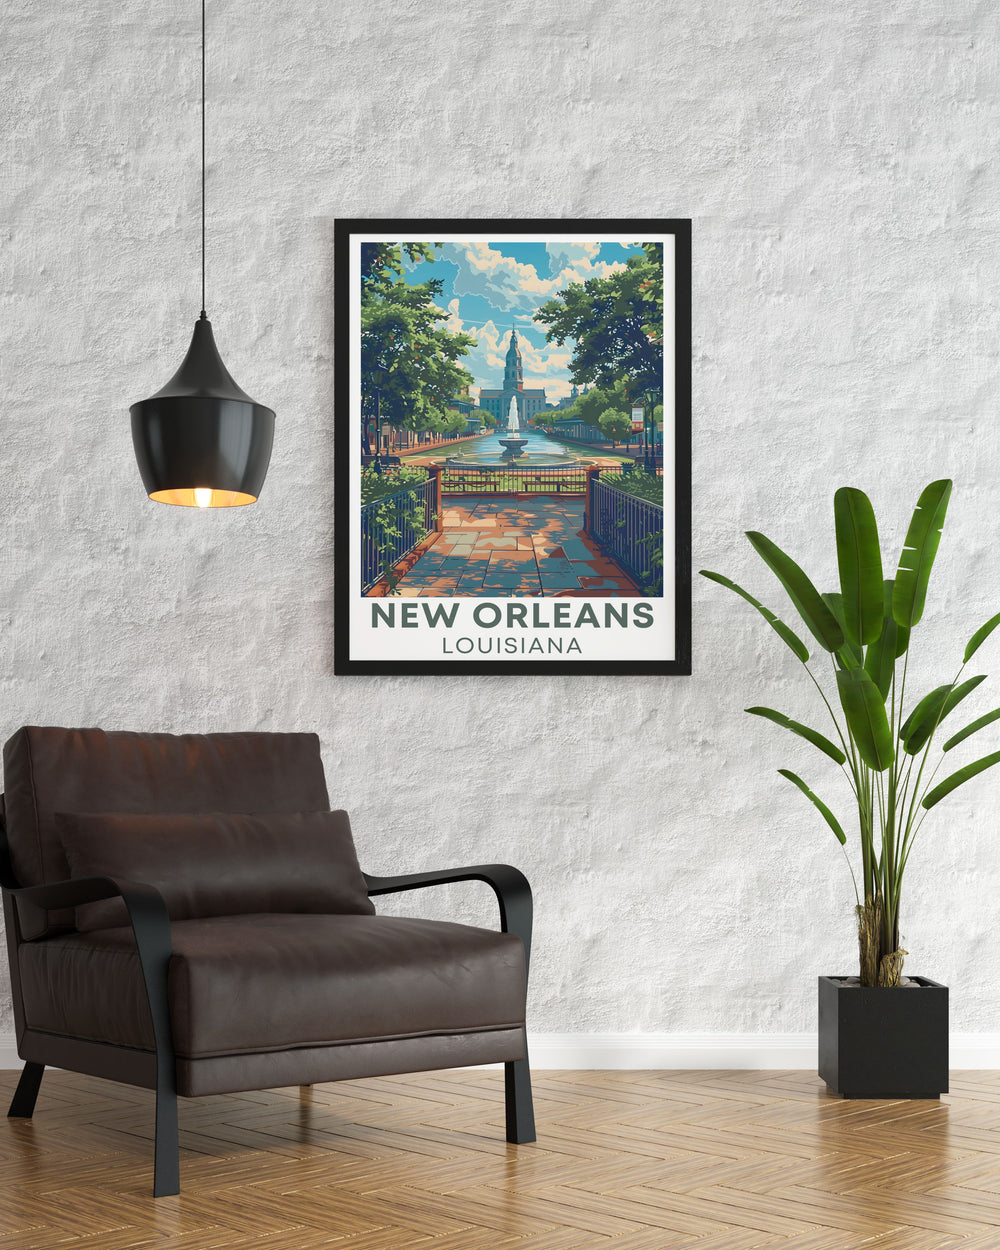 Beautiful Jackson Square print featuring the stunning buildings and lively surroundings of New Orleans ideal for adding a touch of Louisiana elegance to your home or office decor and perfect for lovers of New Orleans travel